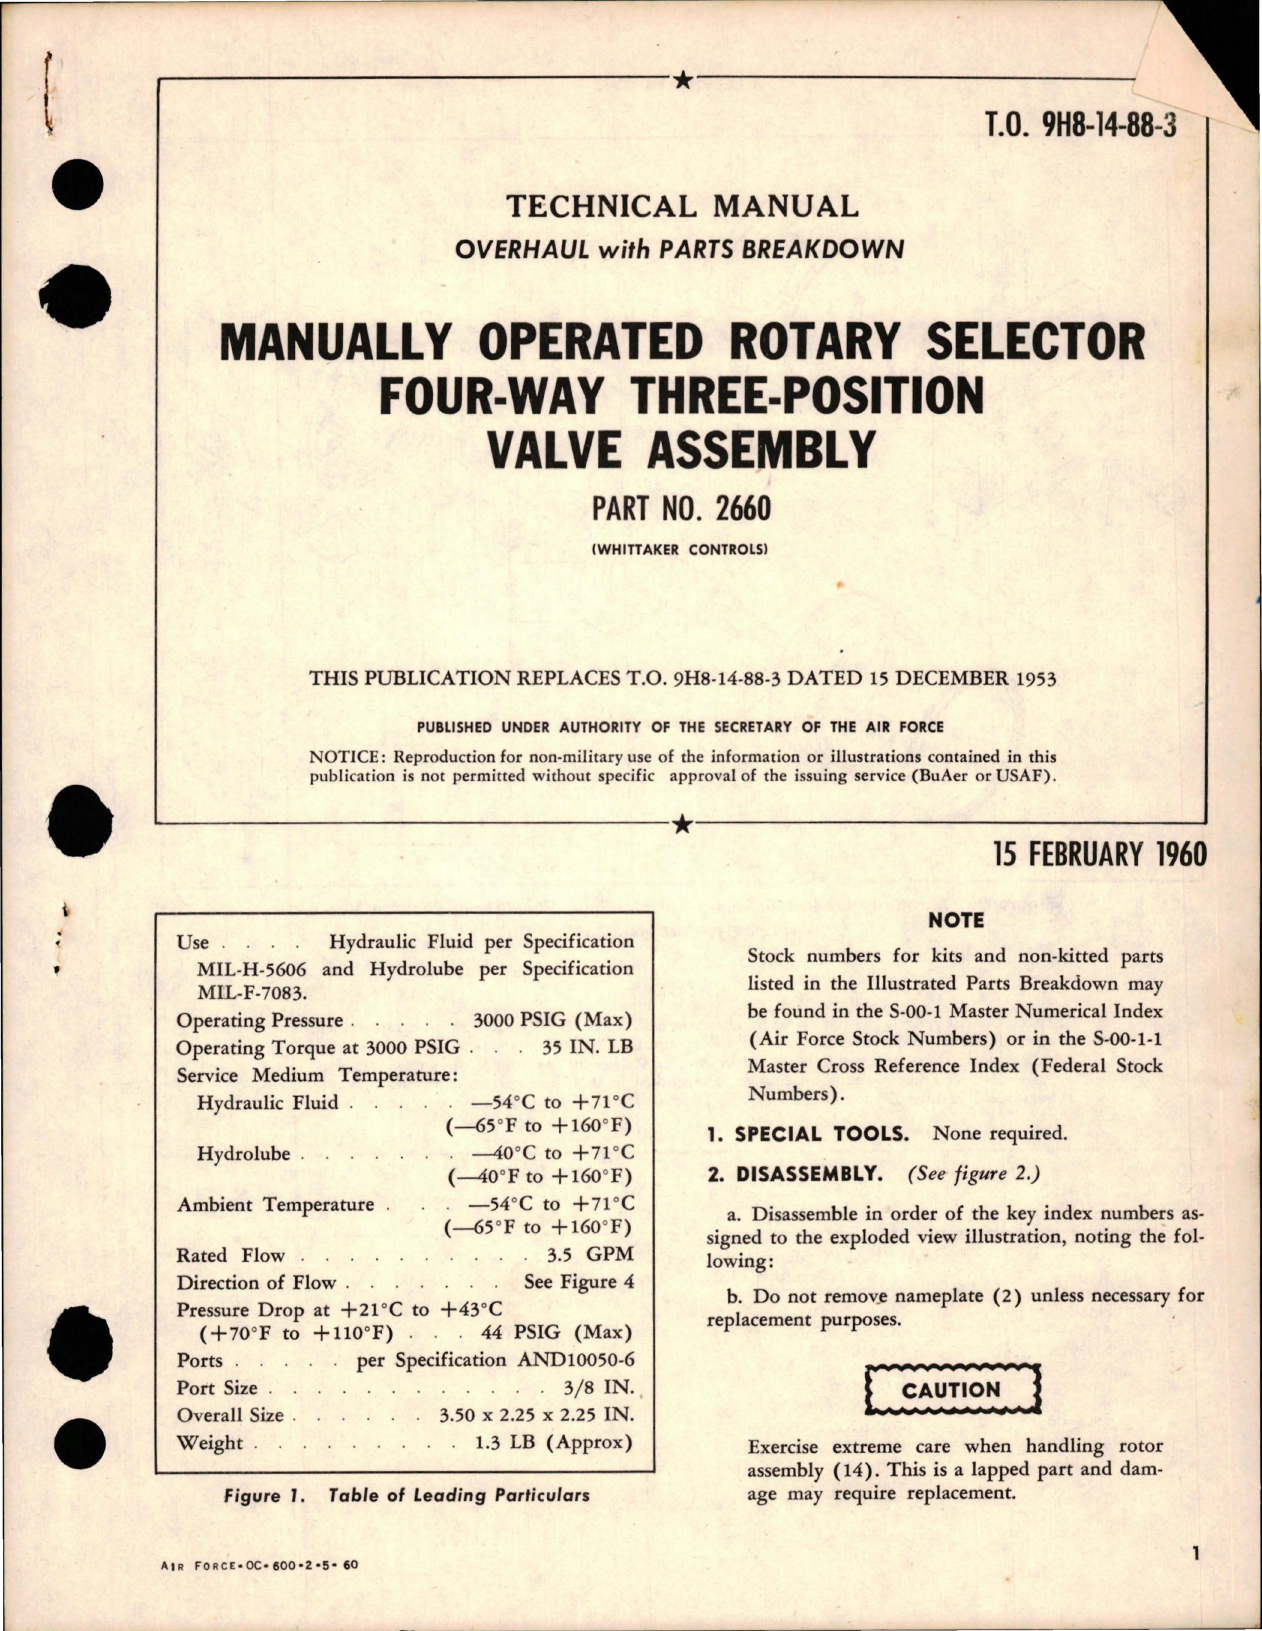 Sample page 1 from AirCorps Library document: Overhaul with Parts Breakdown for Manually Operated Rotary Selector Four-Way Three-Position Valve Assembly - Part 2660